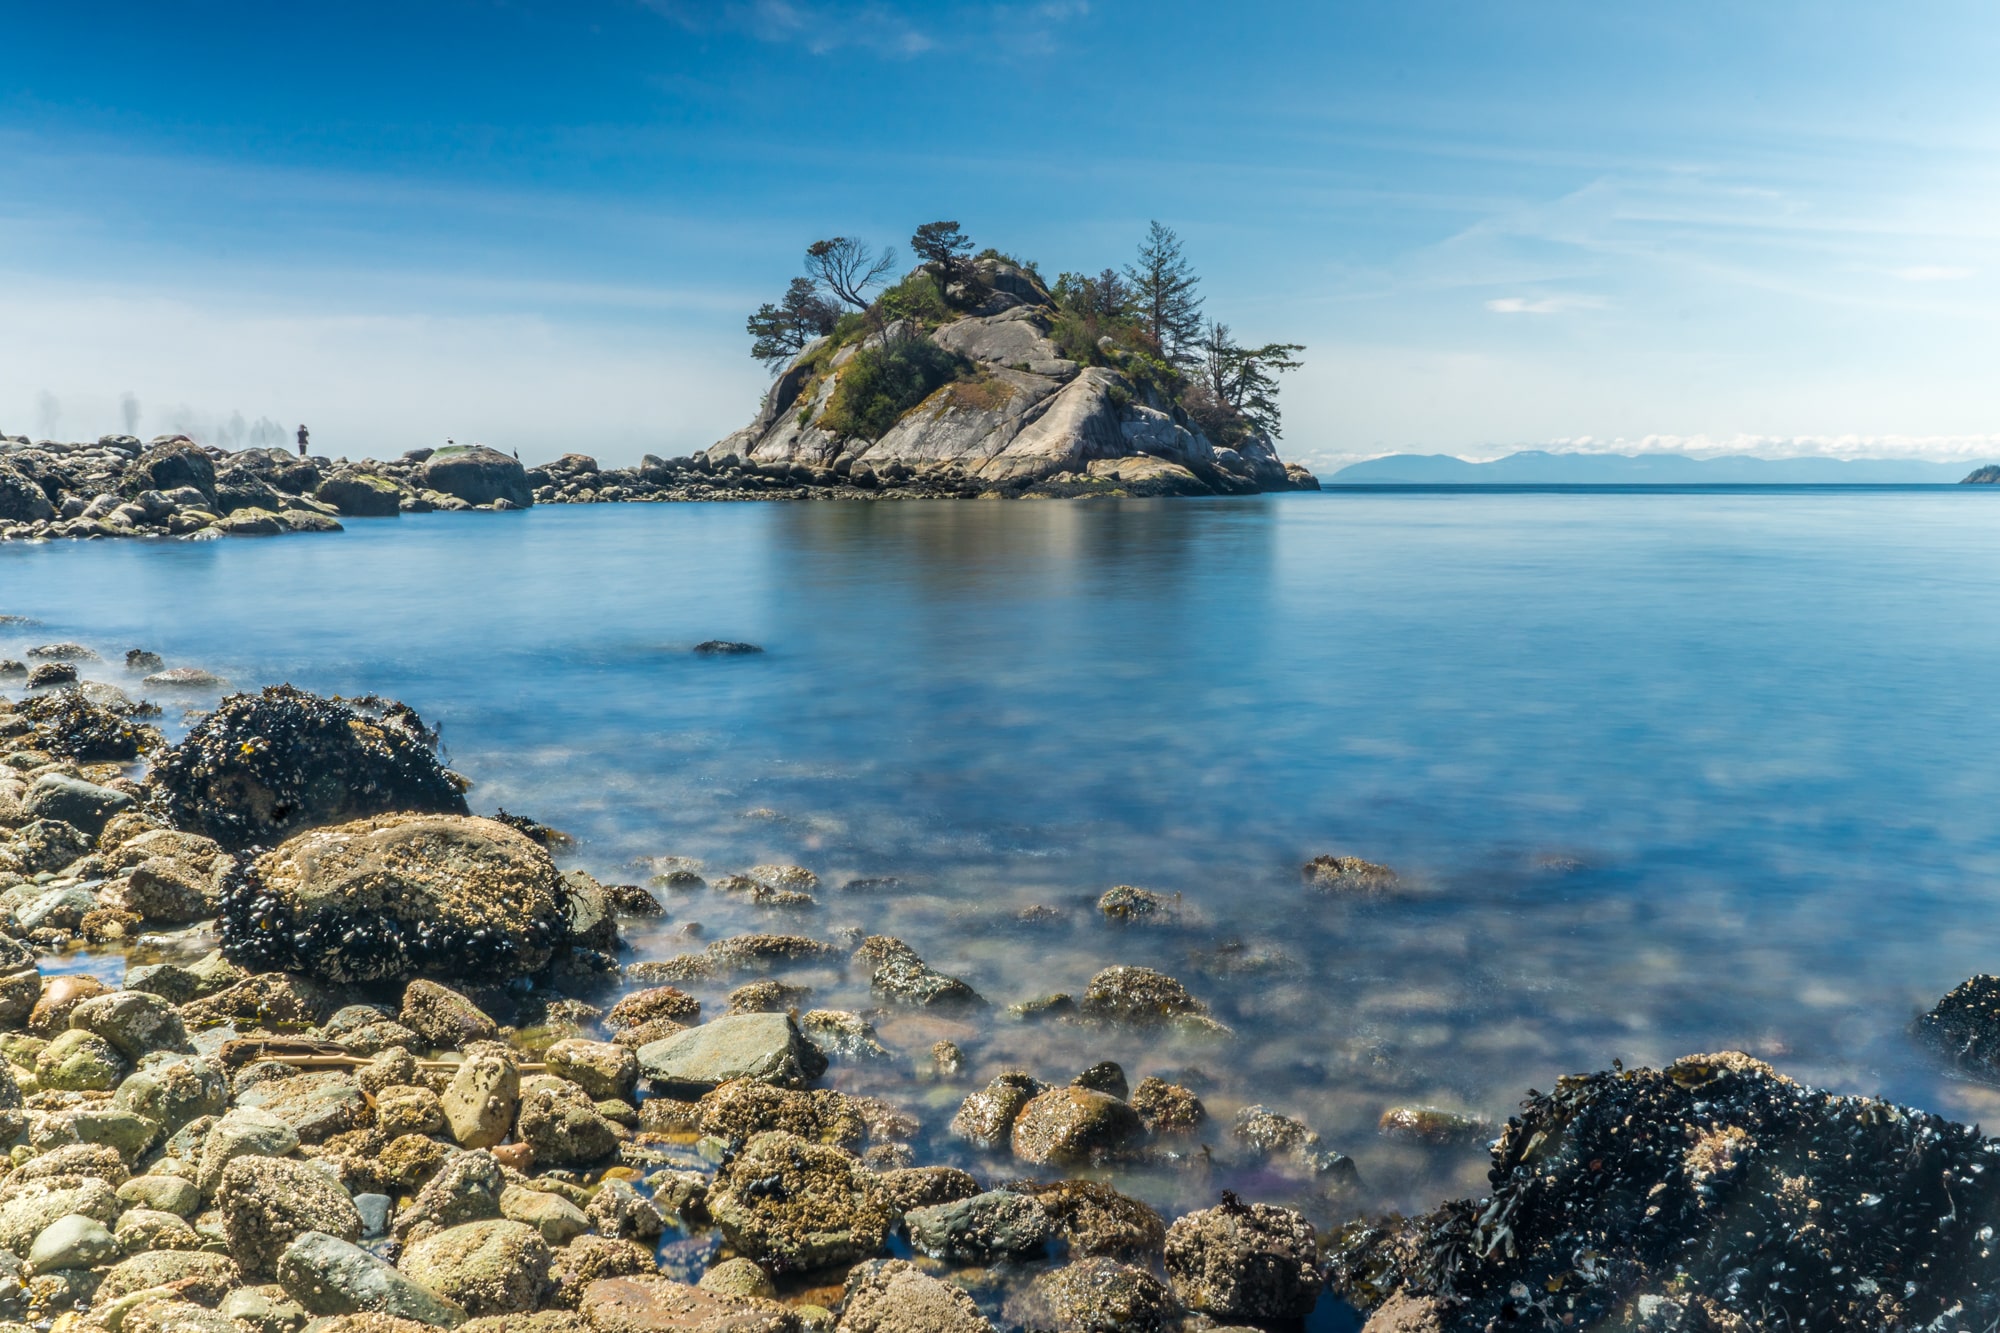 Whytecliff Park in West Vancouver